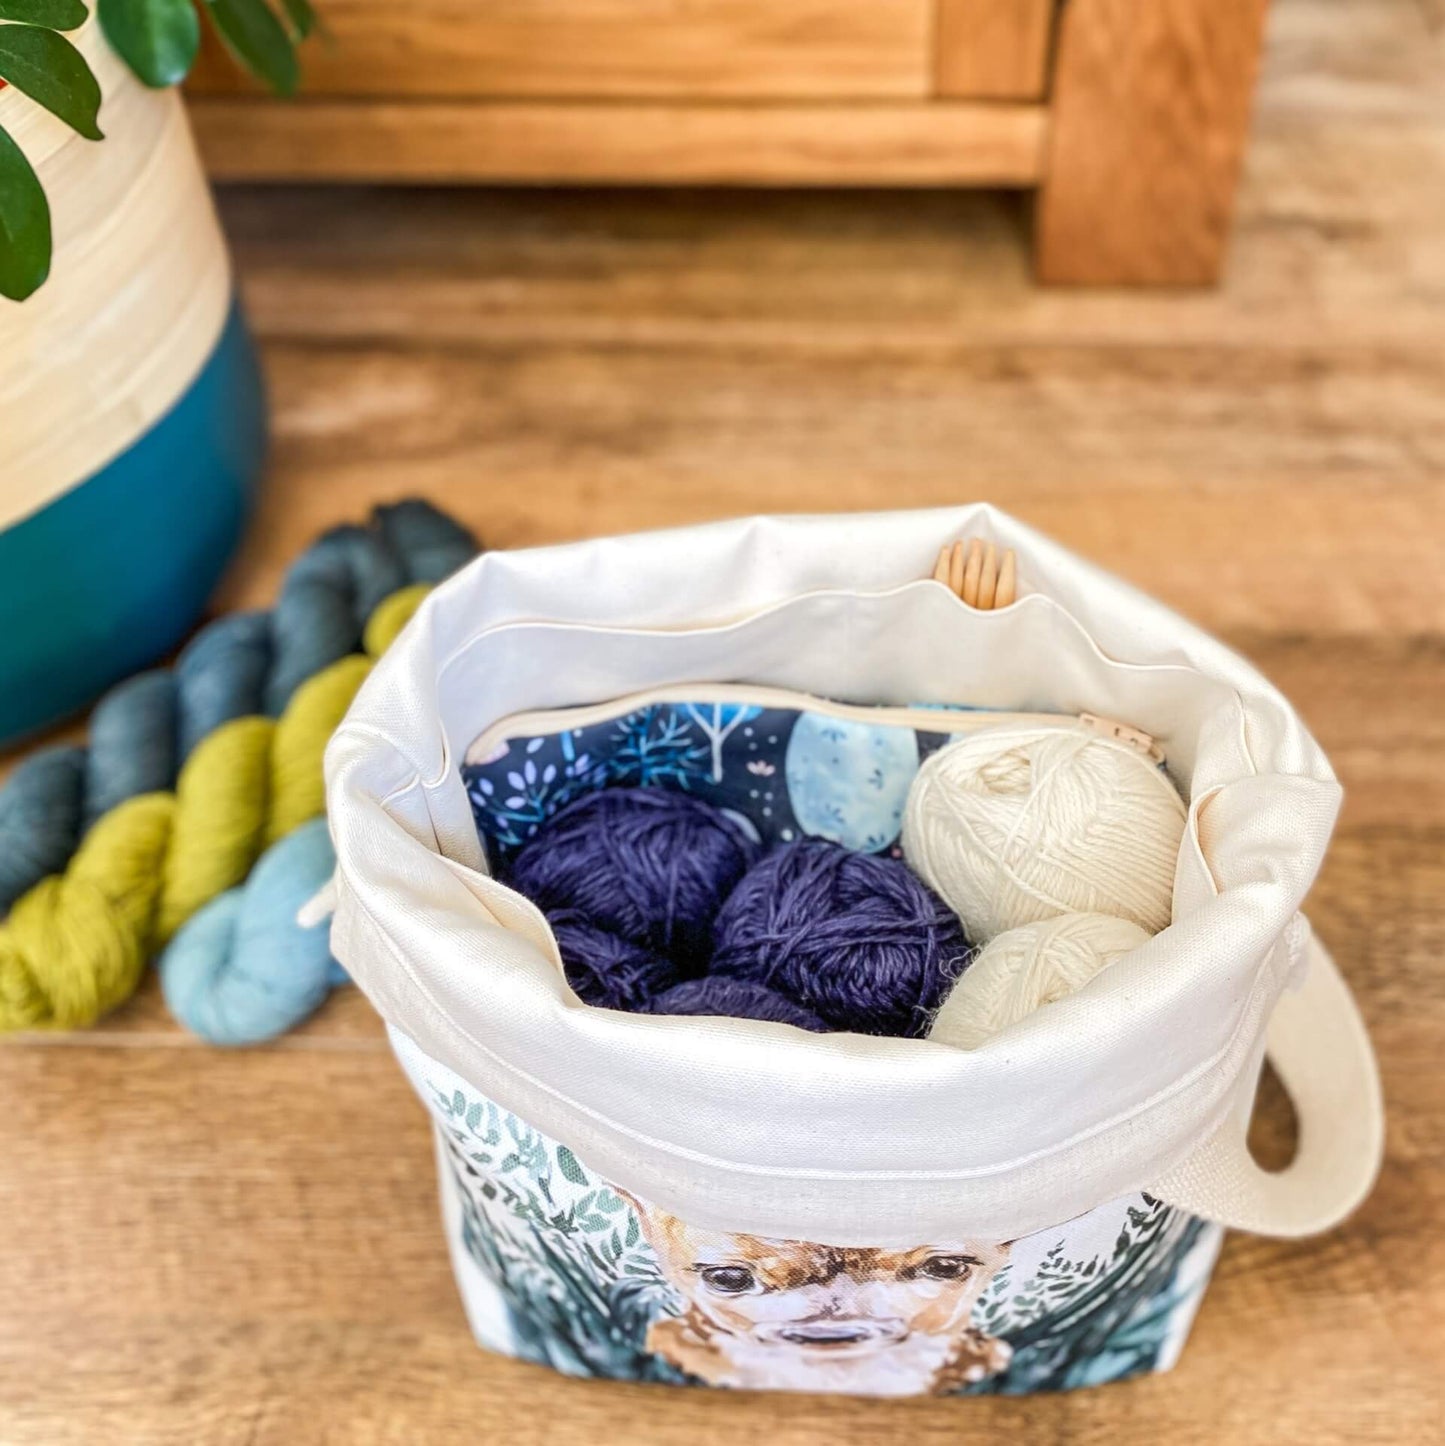 The inside of a knitting project bag is shown full of skeins of yarn and with a notions pouch tucked in. Also shown in one of the pockets are some wooden double point knitting needles. The bag sits on a floor next to three skeins of yarn and a house plant. 